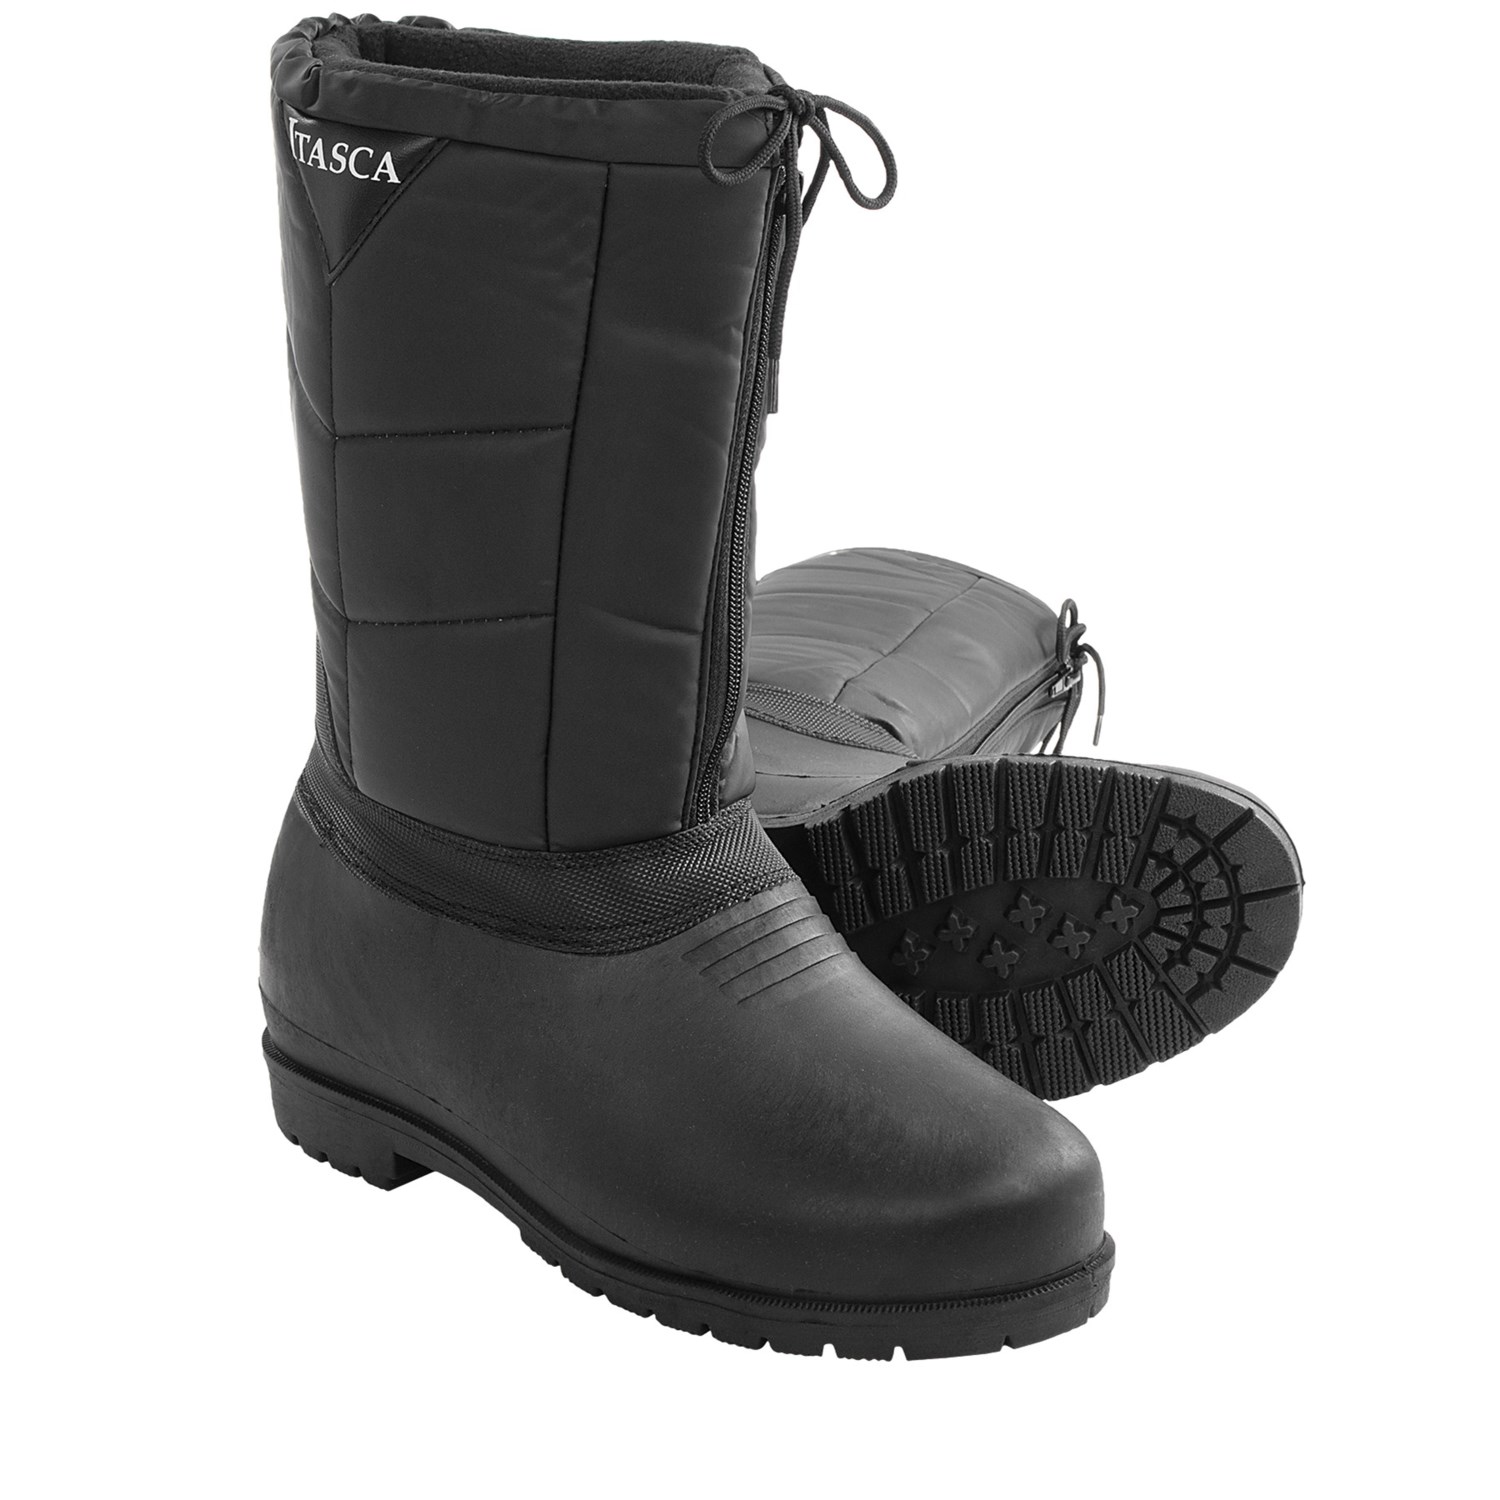 Itasca Benchwarmer Pac Boots - Waterproof, Insulated (For Men) - Save 30%